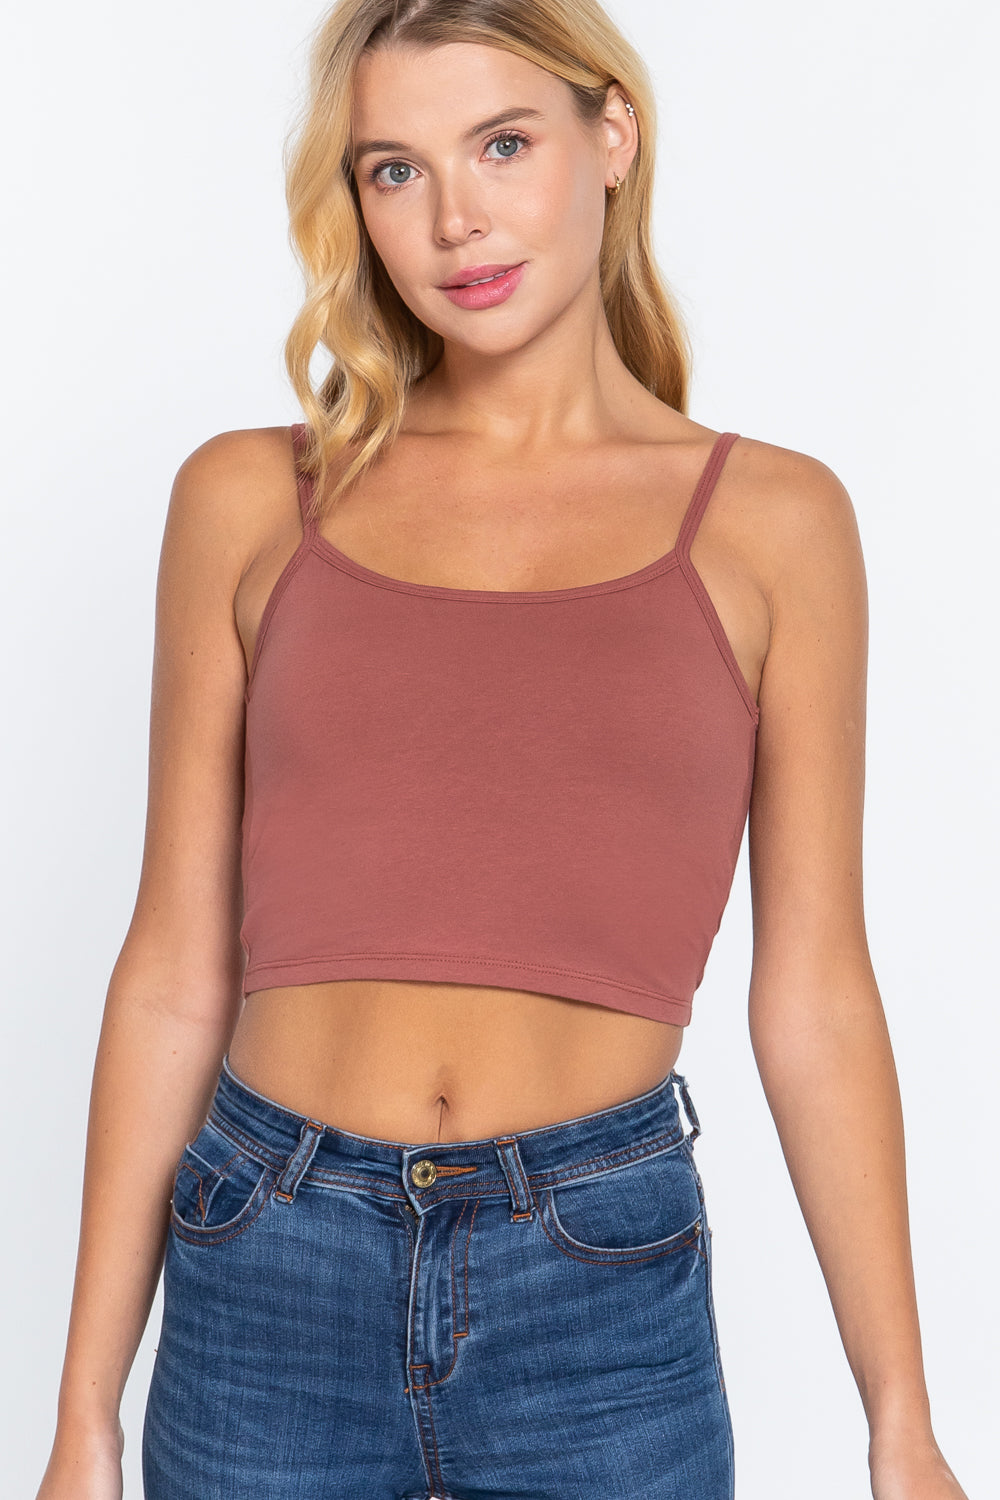 TERRACOTTA - Round Neck W/removable Bra Cup Cotton Spandex Bra Top - 17 colors - Ships from The USA - womens tank top at TFC&H Co.